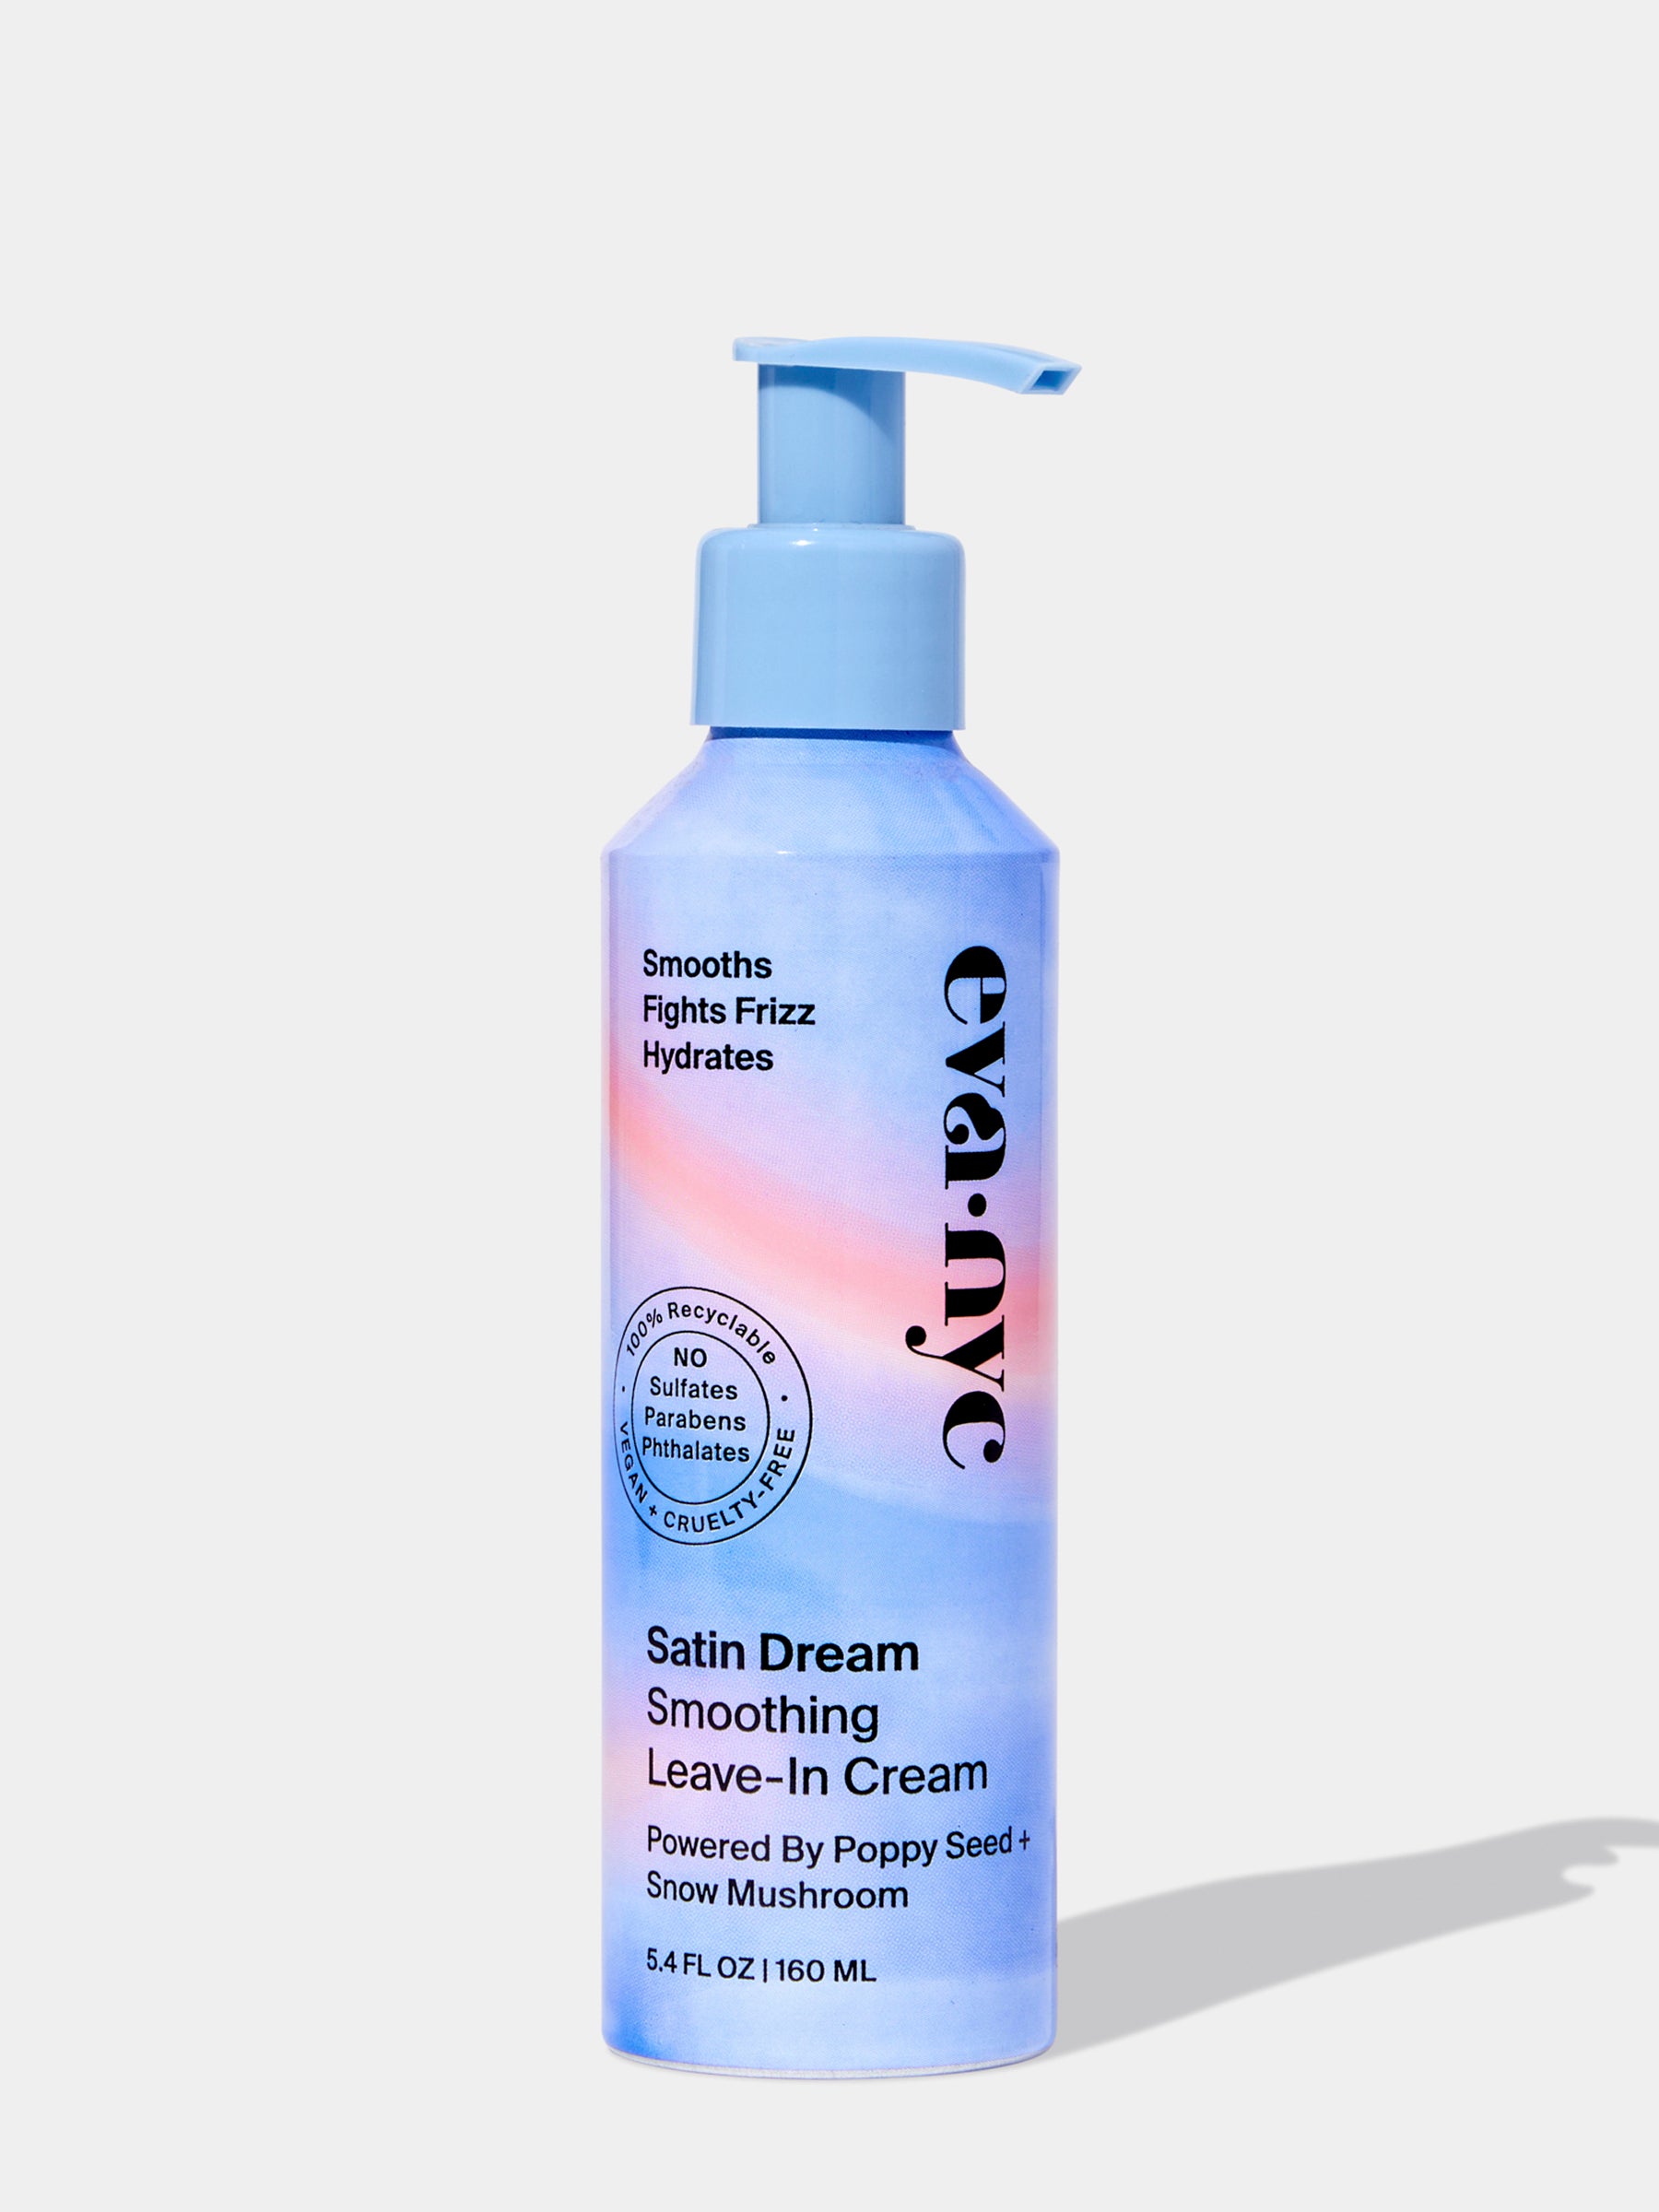 Satin Dream Smoothing Leave-In Cream